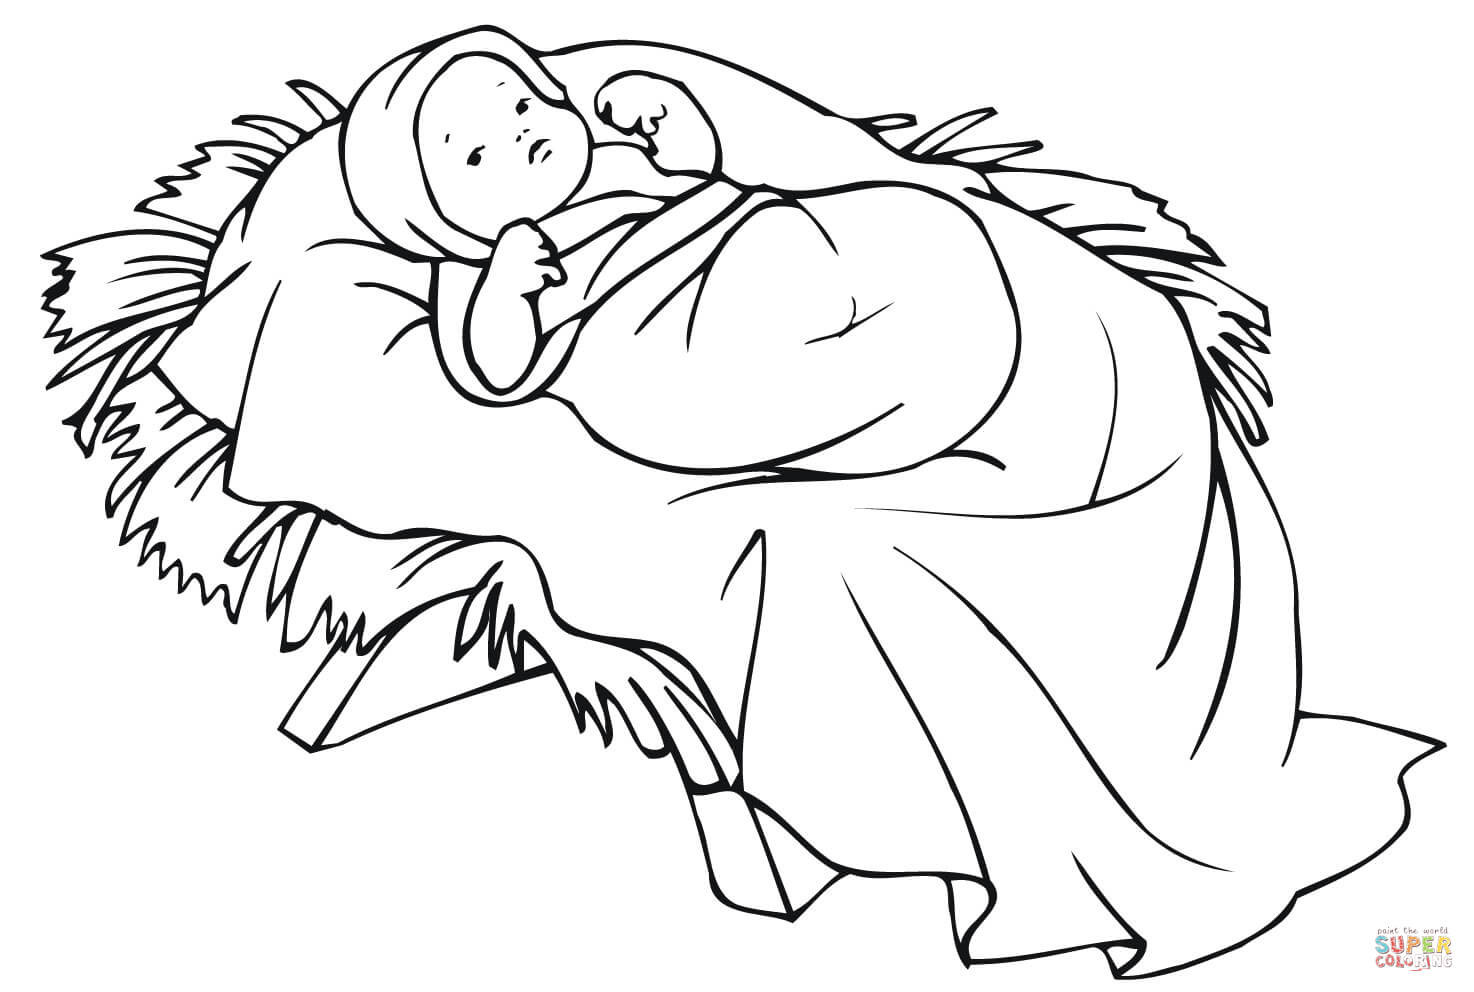 Baby Jesus In A Manger Coloring Pages
 Baby Jesus in a Manger coloring page